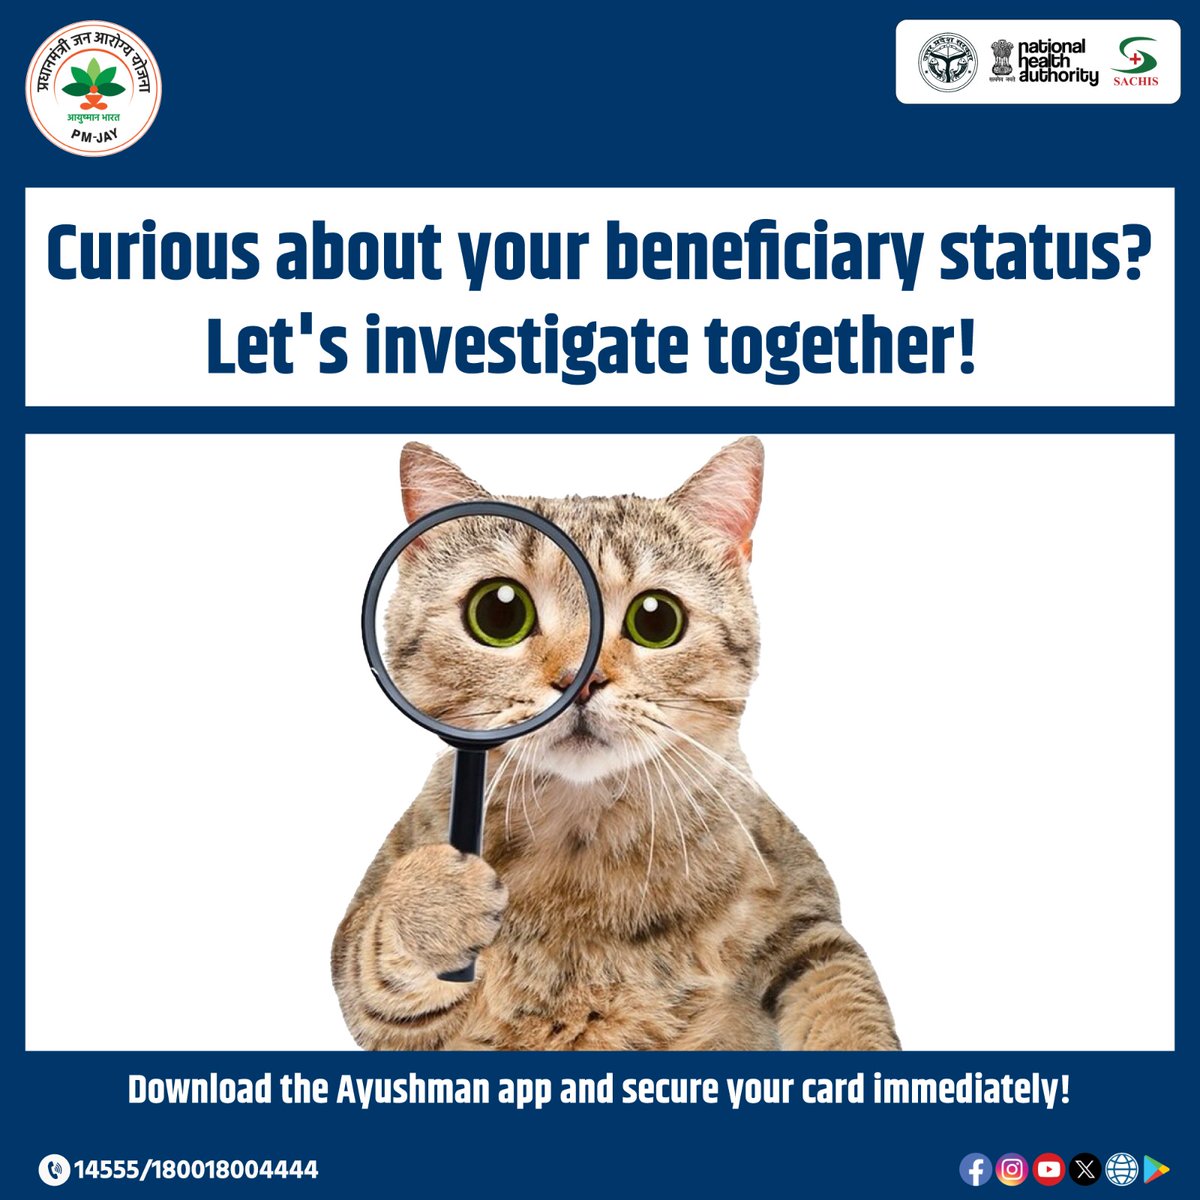 To secure your #Ayushmancard, verify your eligibility now by visiting beneficiary.nha.gov.in or downloading the #Ayushmanapp.

#HealthcareAssistance #EmergencyCoverage #HospitalBenefits #MedicalEmergency #HealthcareAccess #EmergencyAssistance #ayushmaneligibility